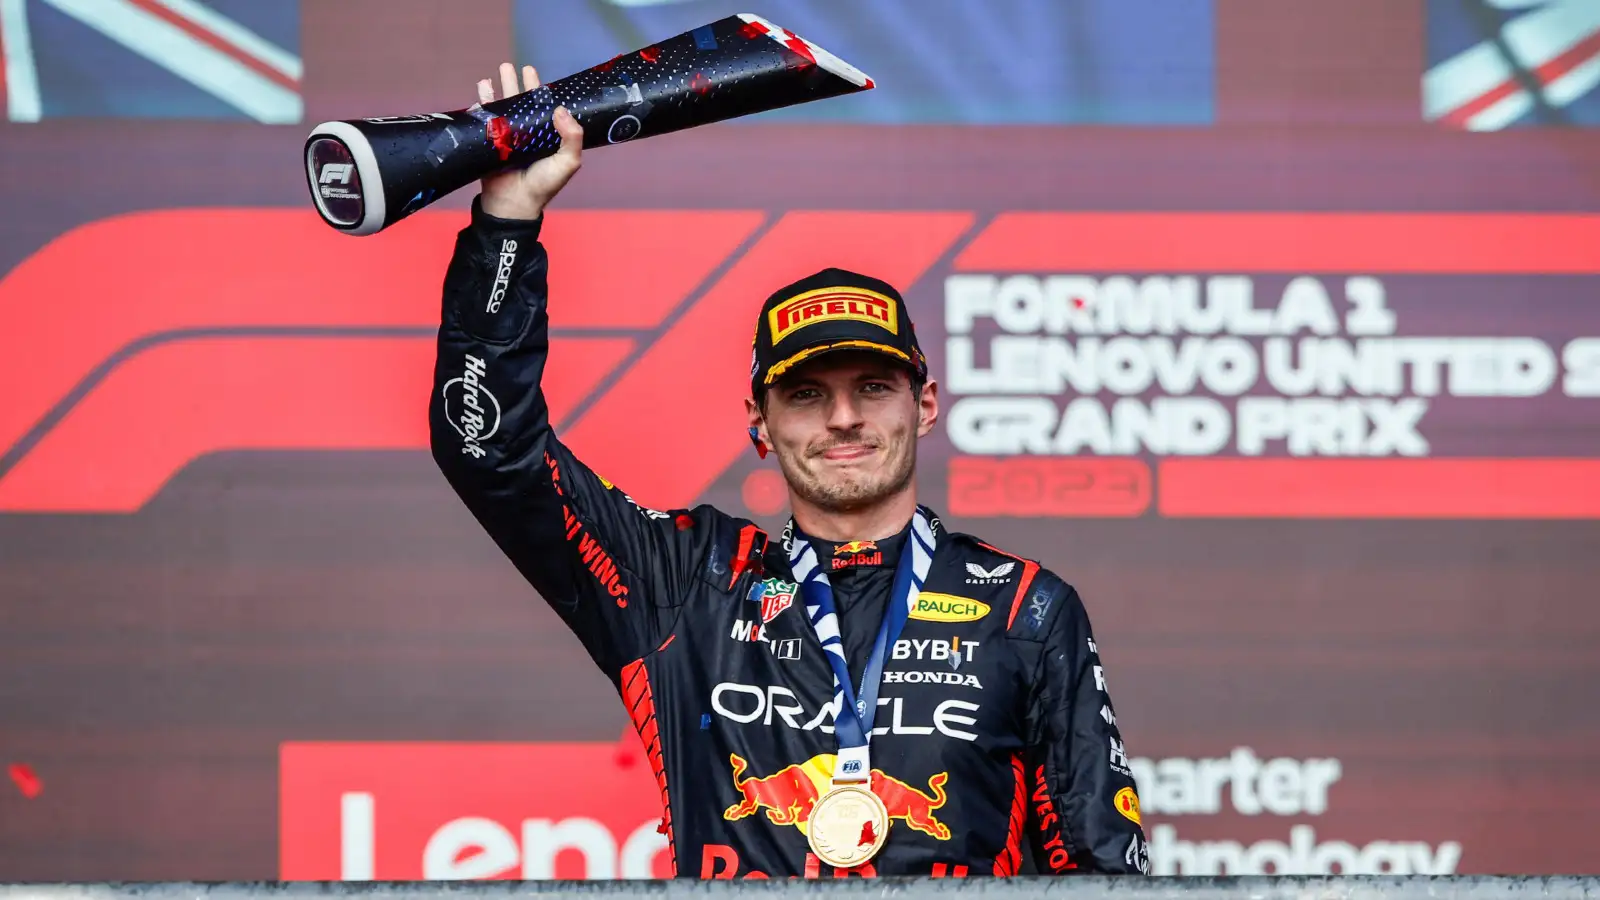 Max Verstappen wins his 50th F1 Grand Prix, celebrating on the podium at the Circuit of the Americas.